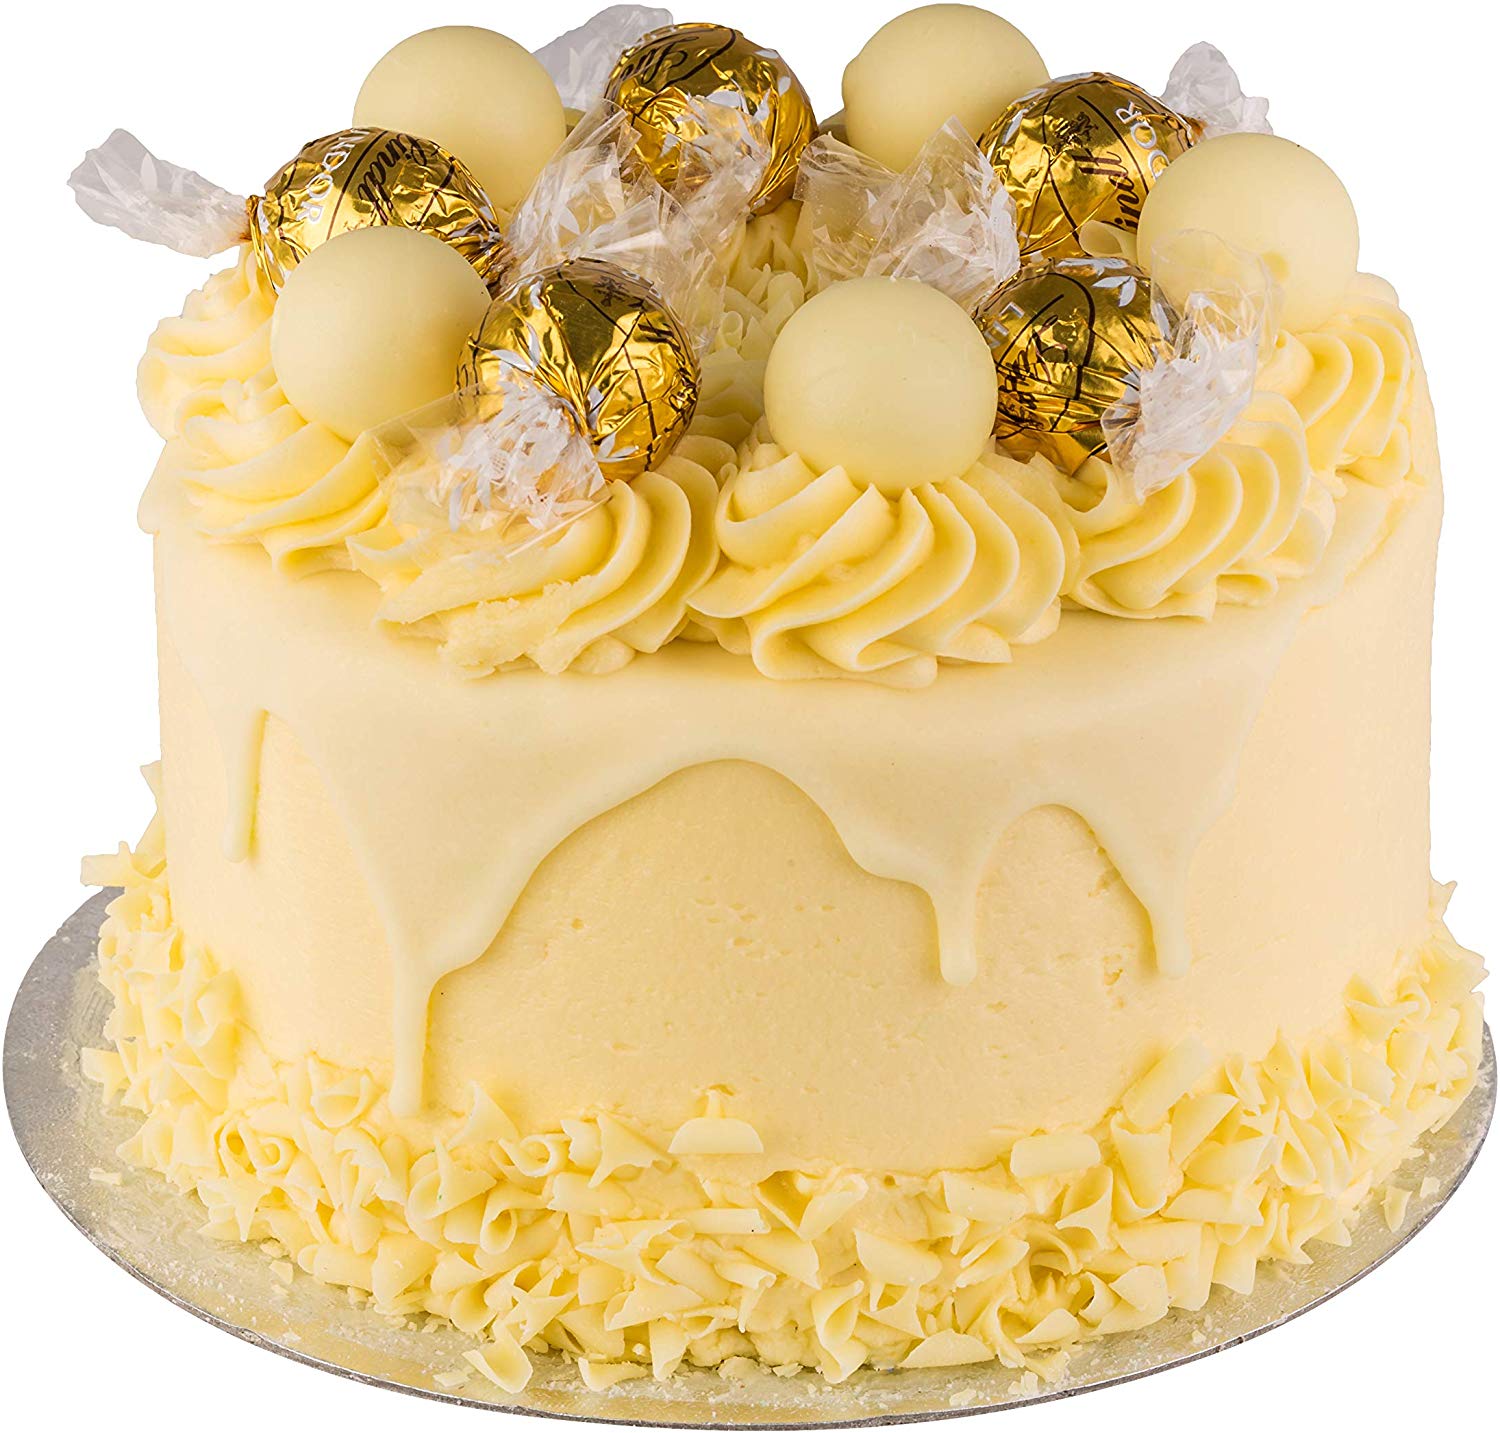 The White Chocolate Lindt Cake